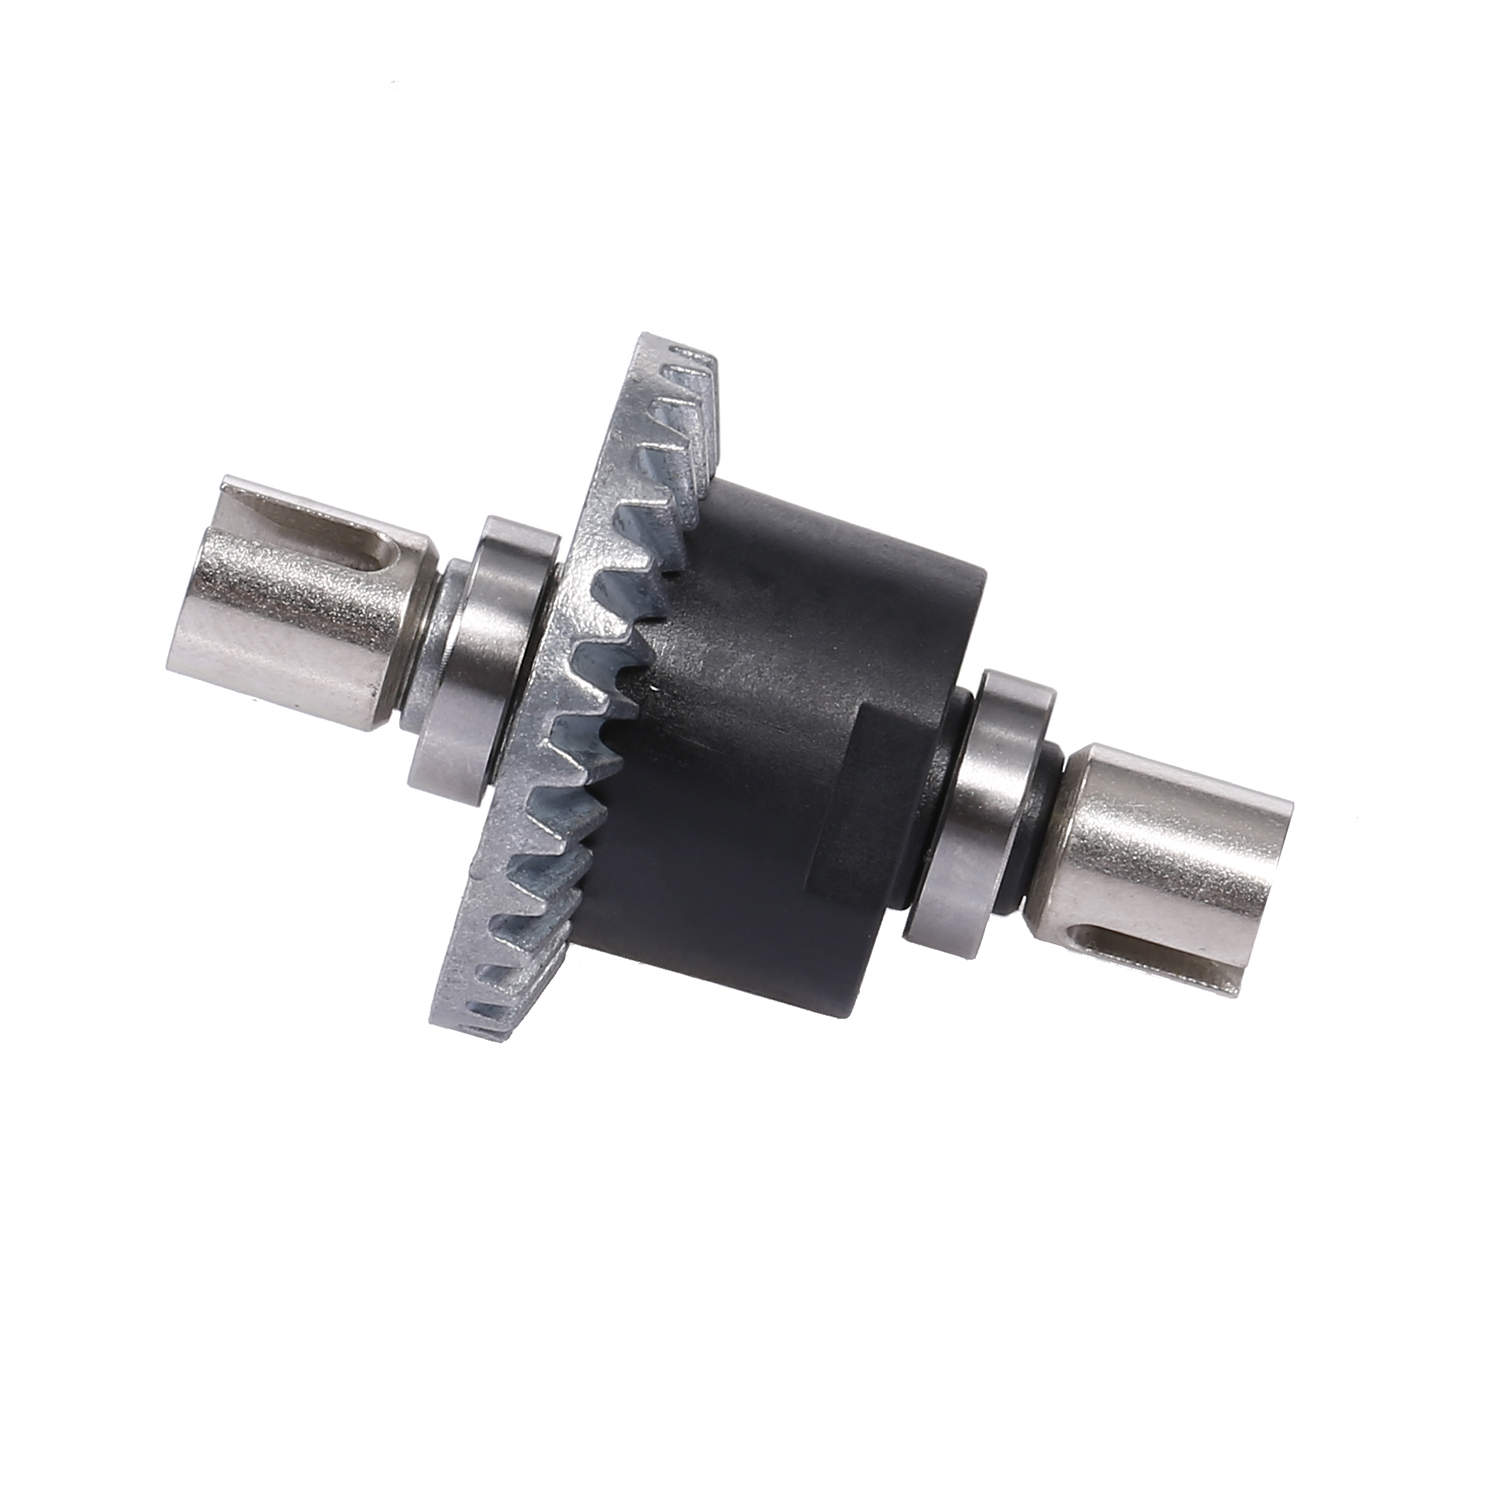 WLtoys Metal Differential for Wltoys XK 144001 RC Car Replacement Part Differential Gear for Wltoys XK 144001 114 2.4GHz RC - image 3 of 7